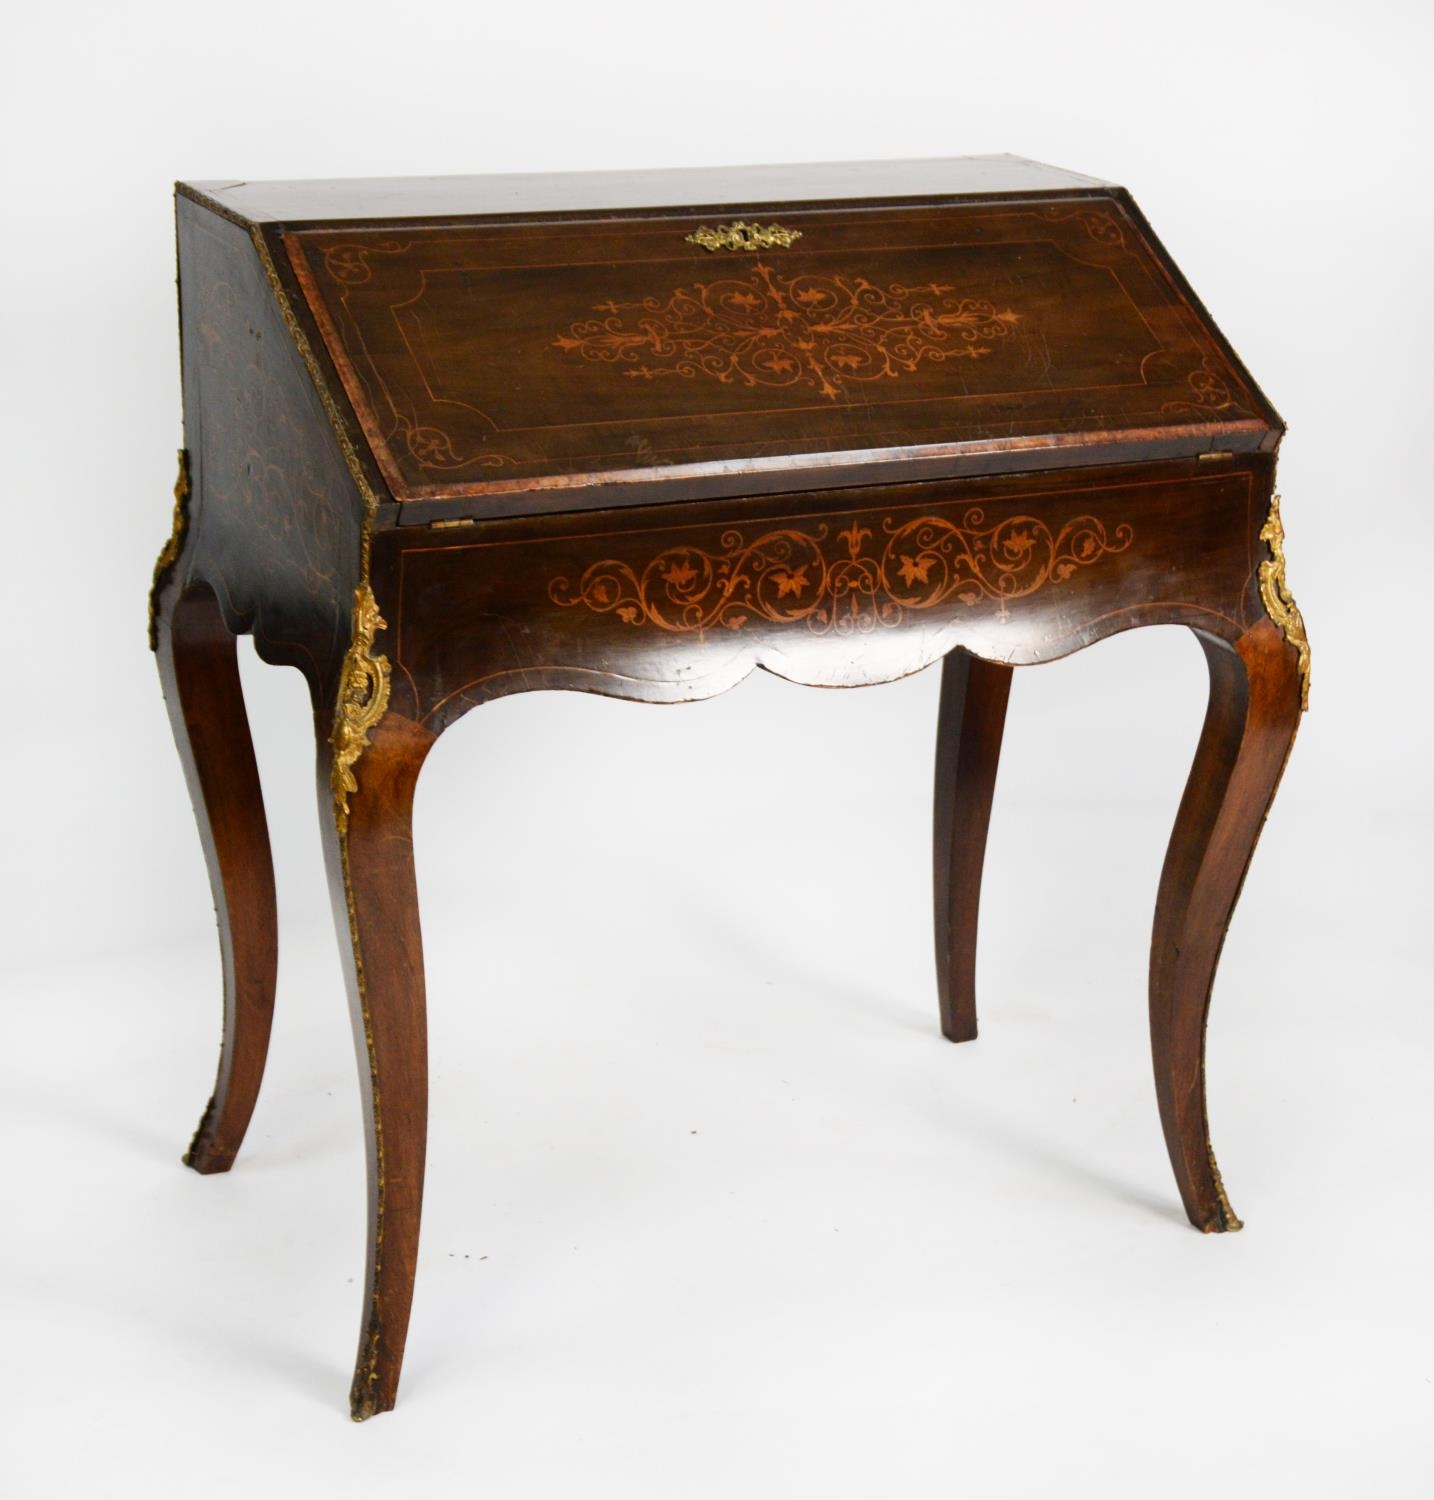 LATE NINETEENTH CENTURY GILT METAL MOUNTED AND INLAID KINGWOOD BUREAU DE DAME, of typical for the - Image 4 of 6